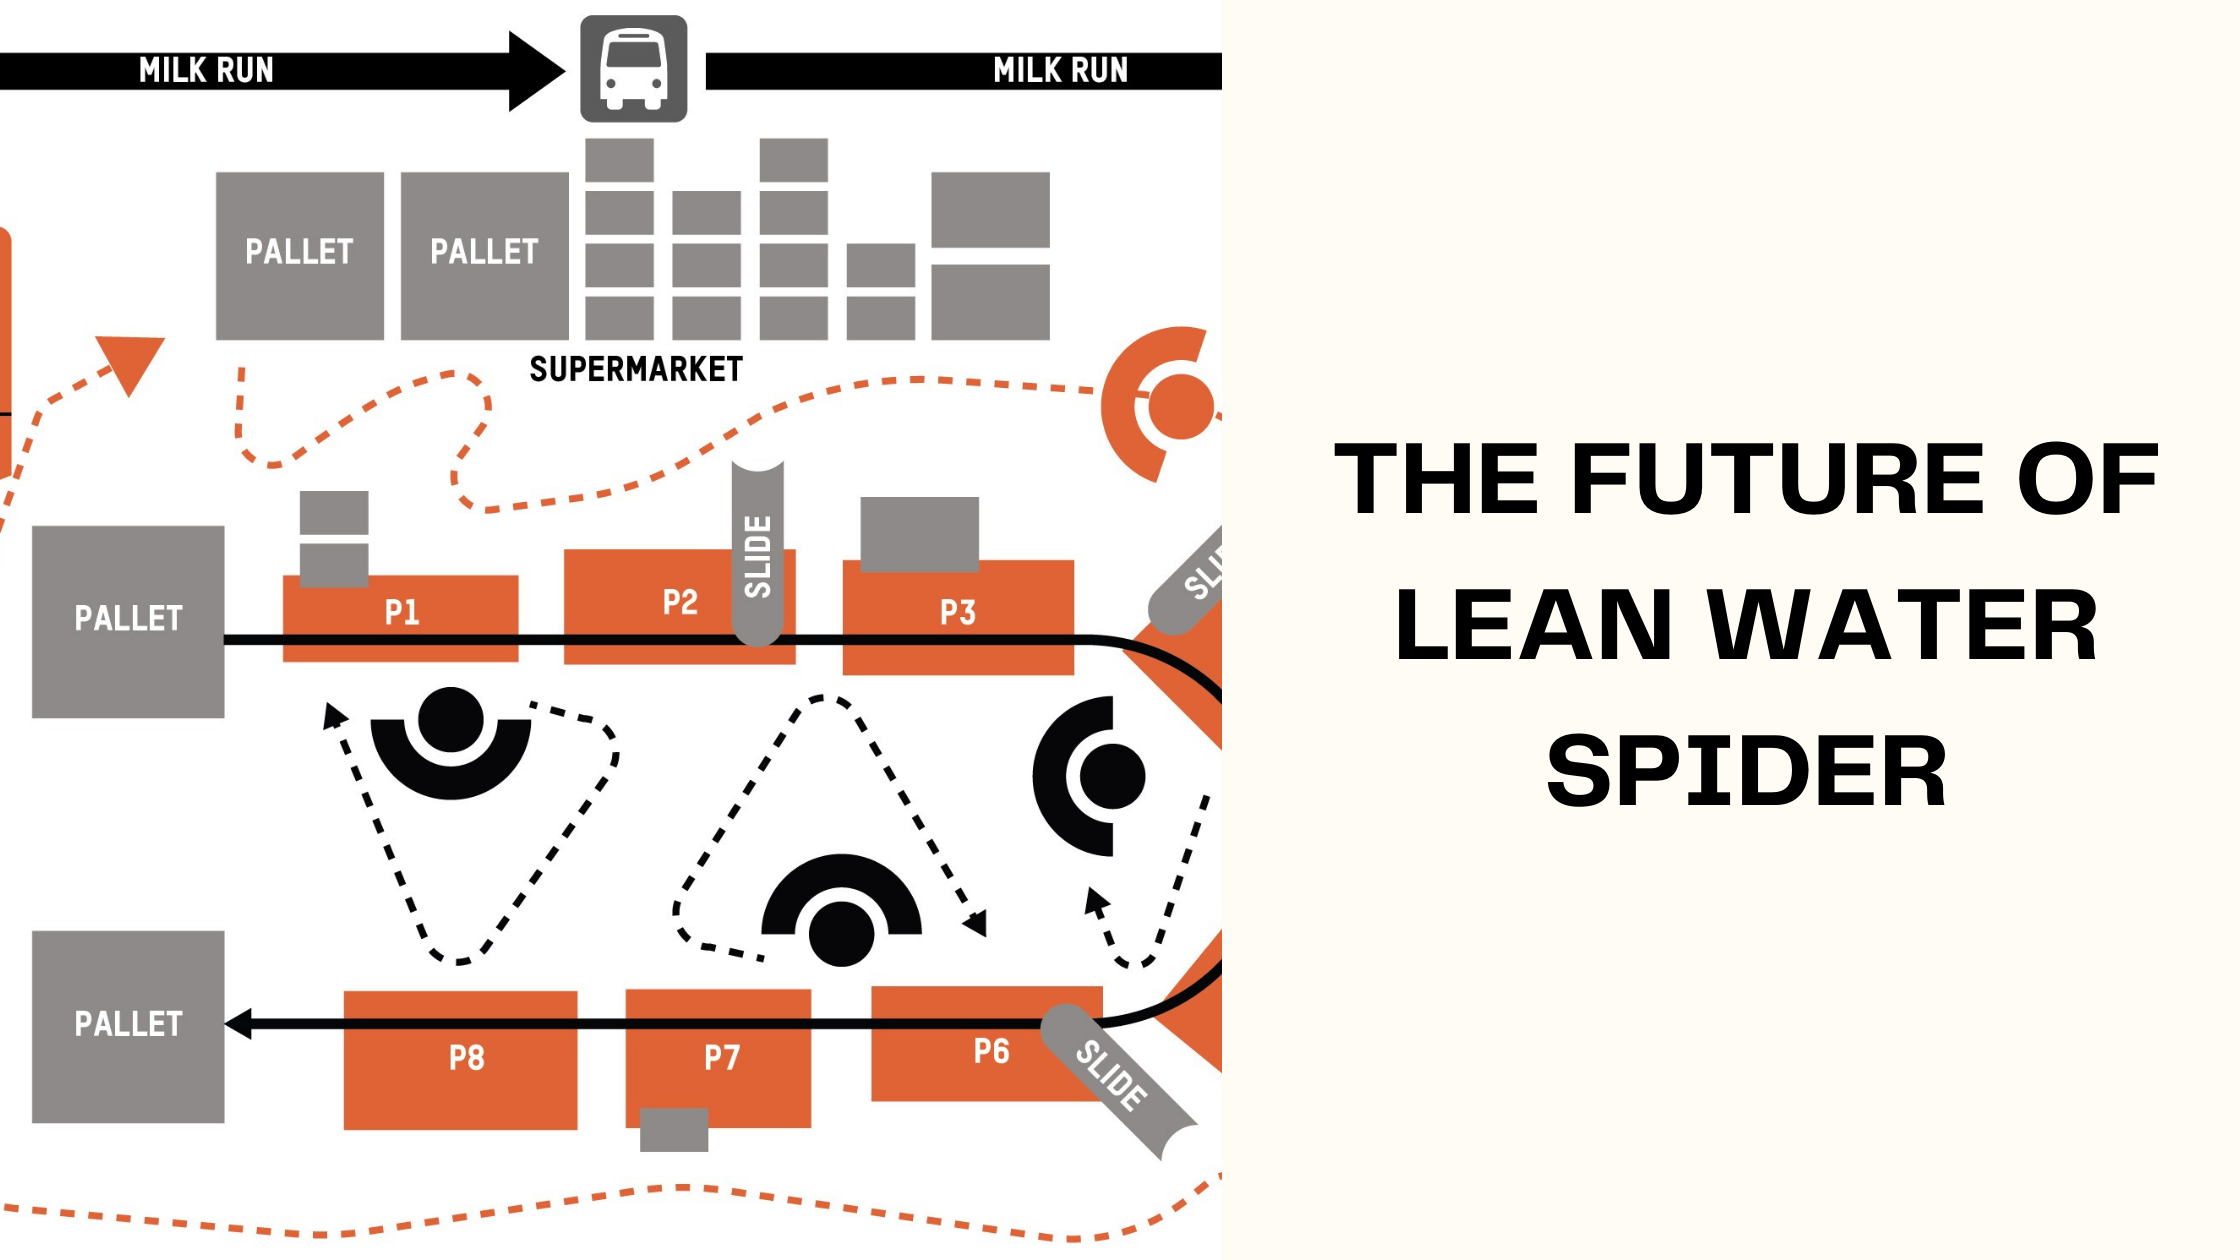 The Future of Lean Water Spider